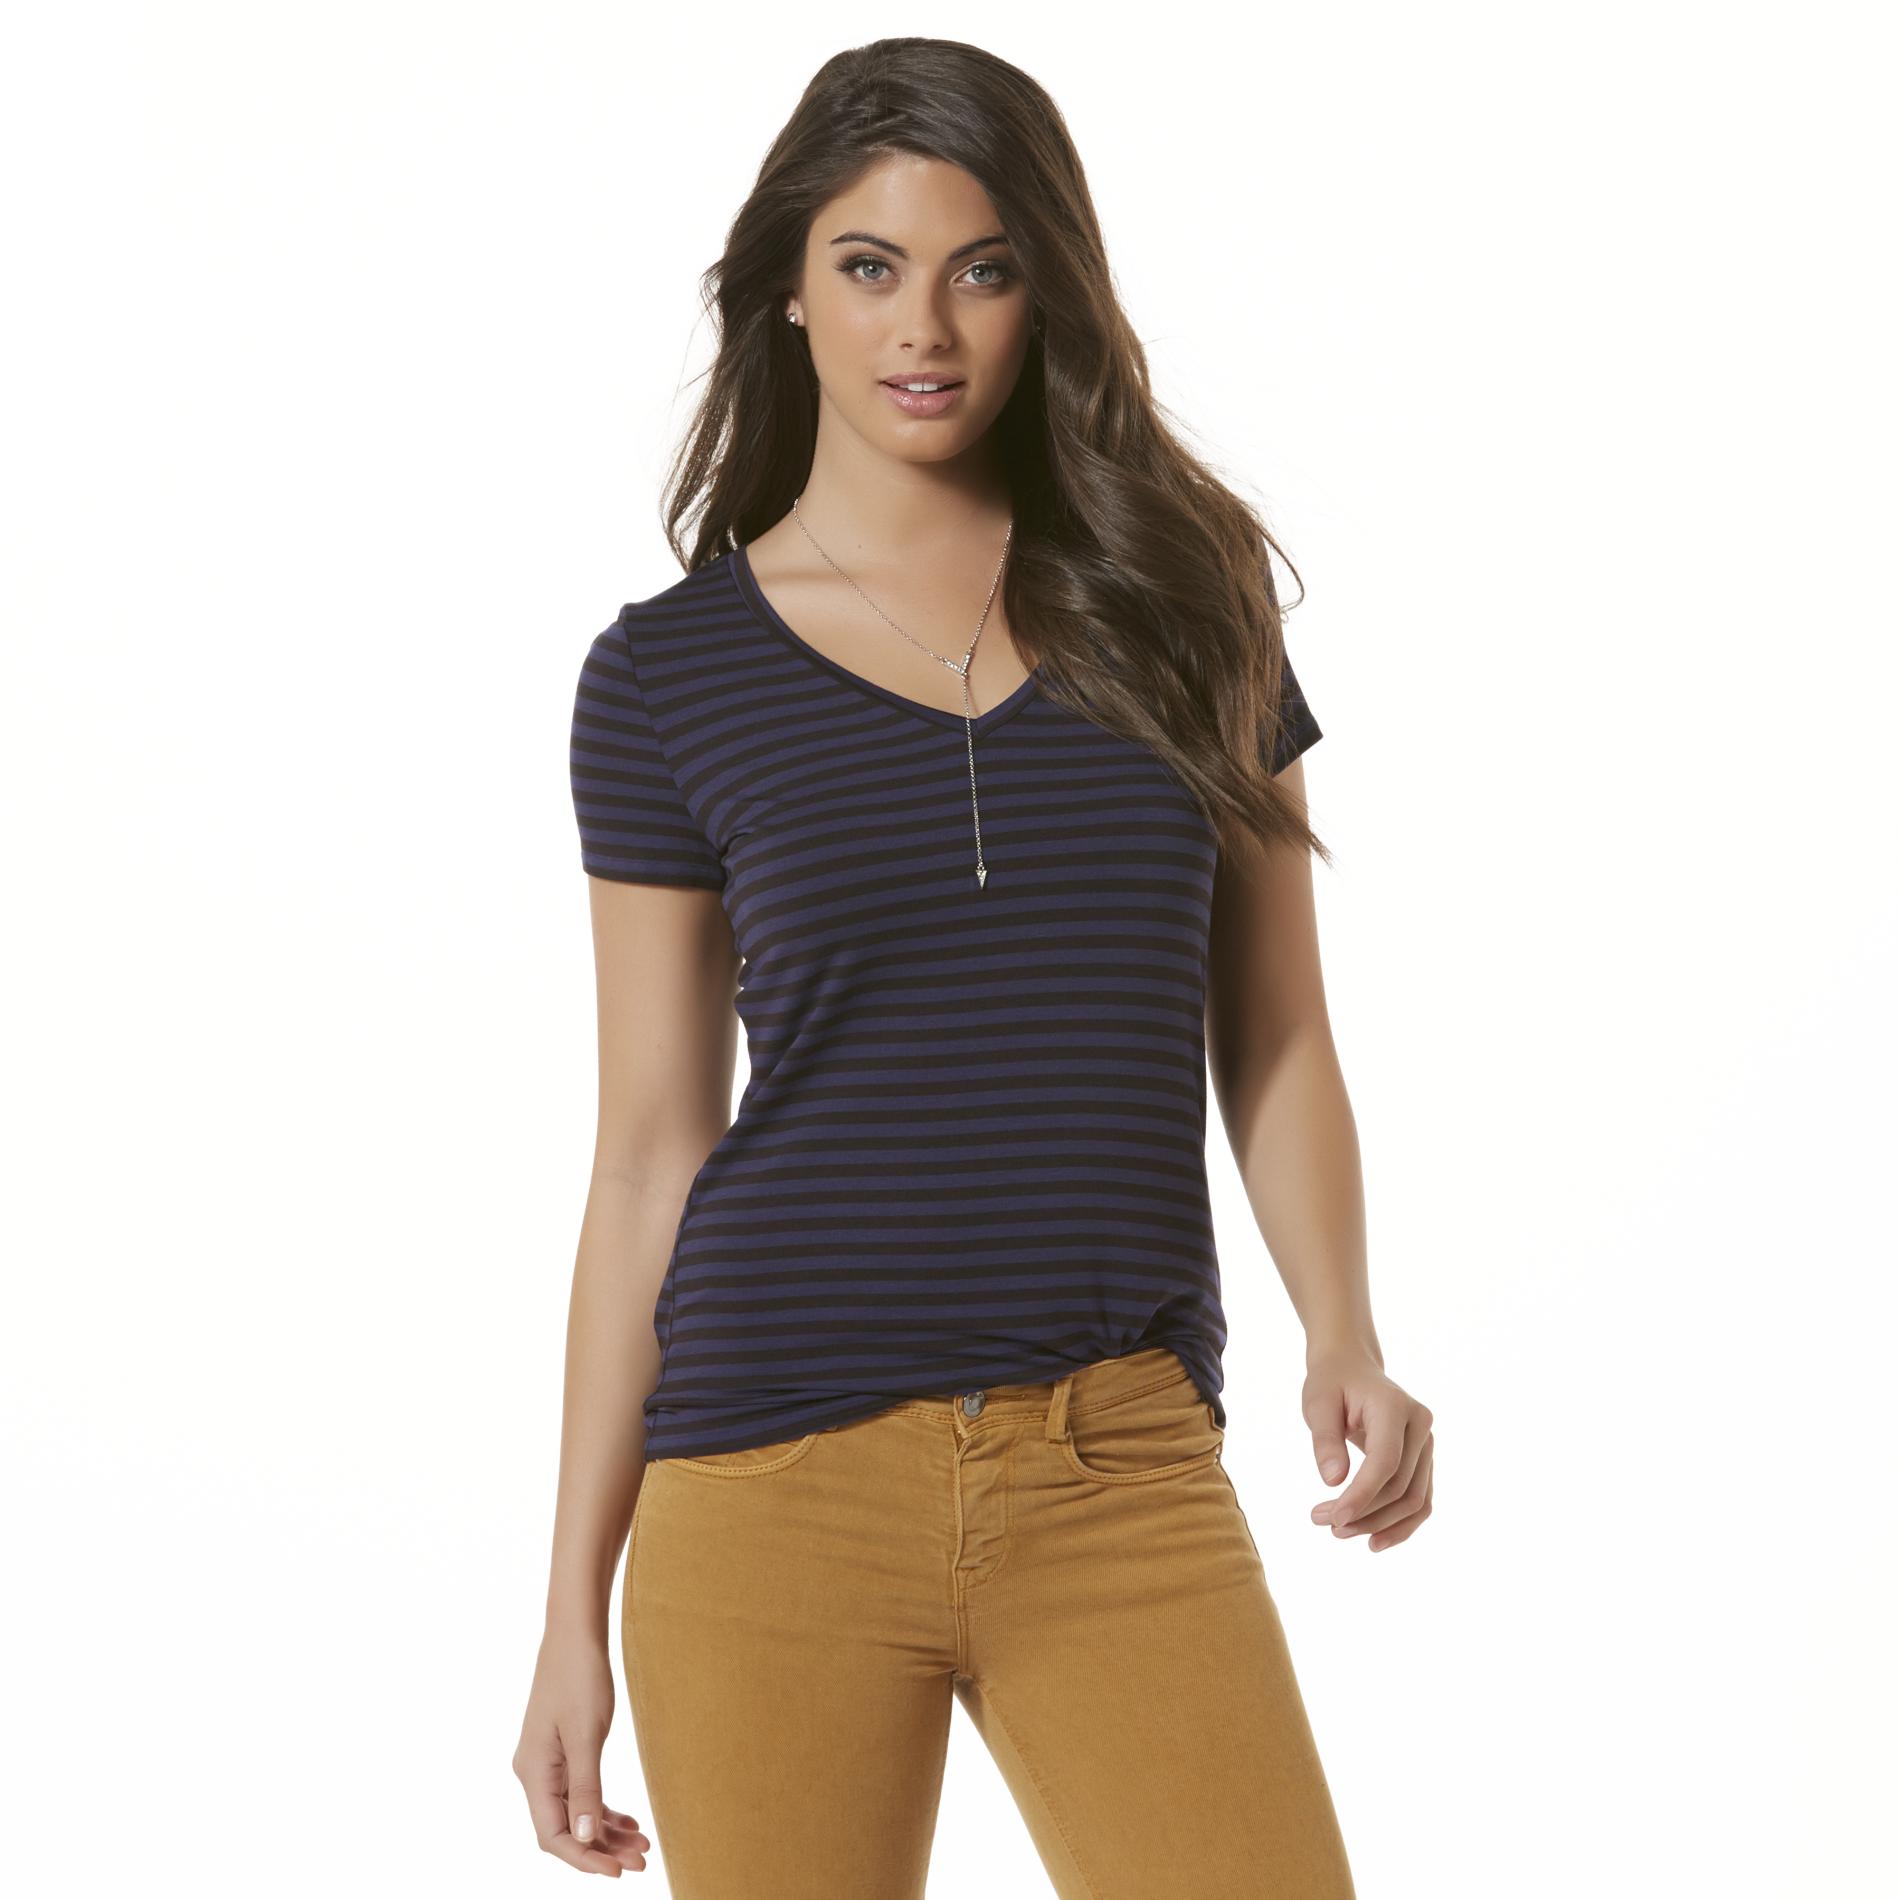 Simply Styled Women's V-Neck T-Shirt - Striped